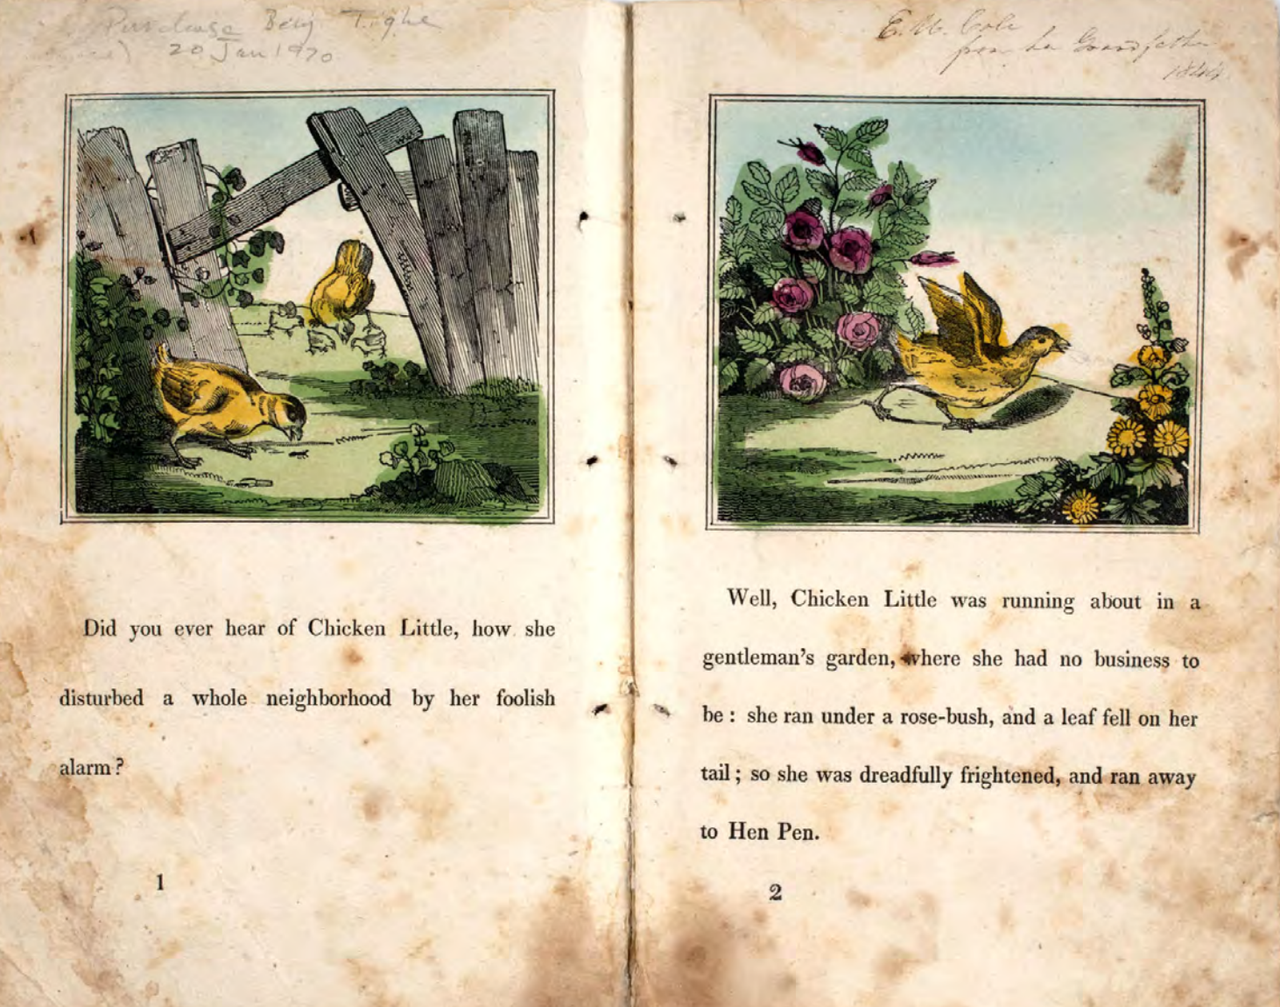 First two pages of the 1840 children's illustrated book: The Remarkable Story of Chicken Little